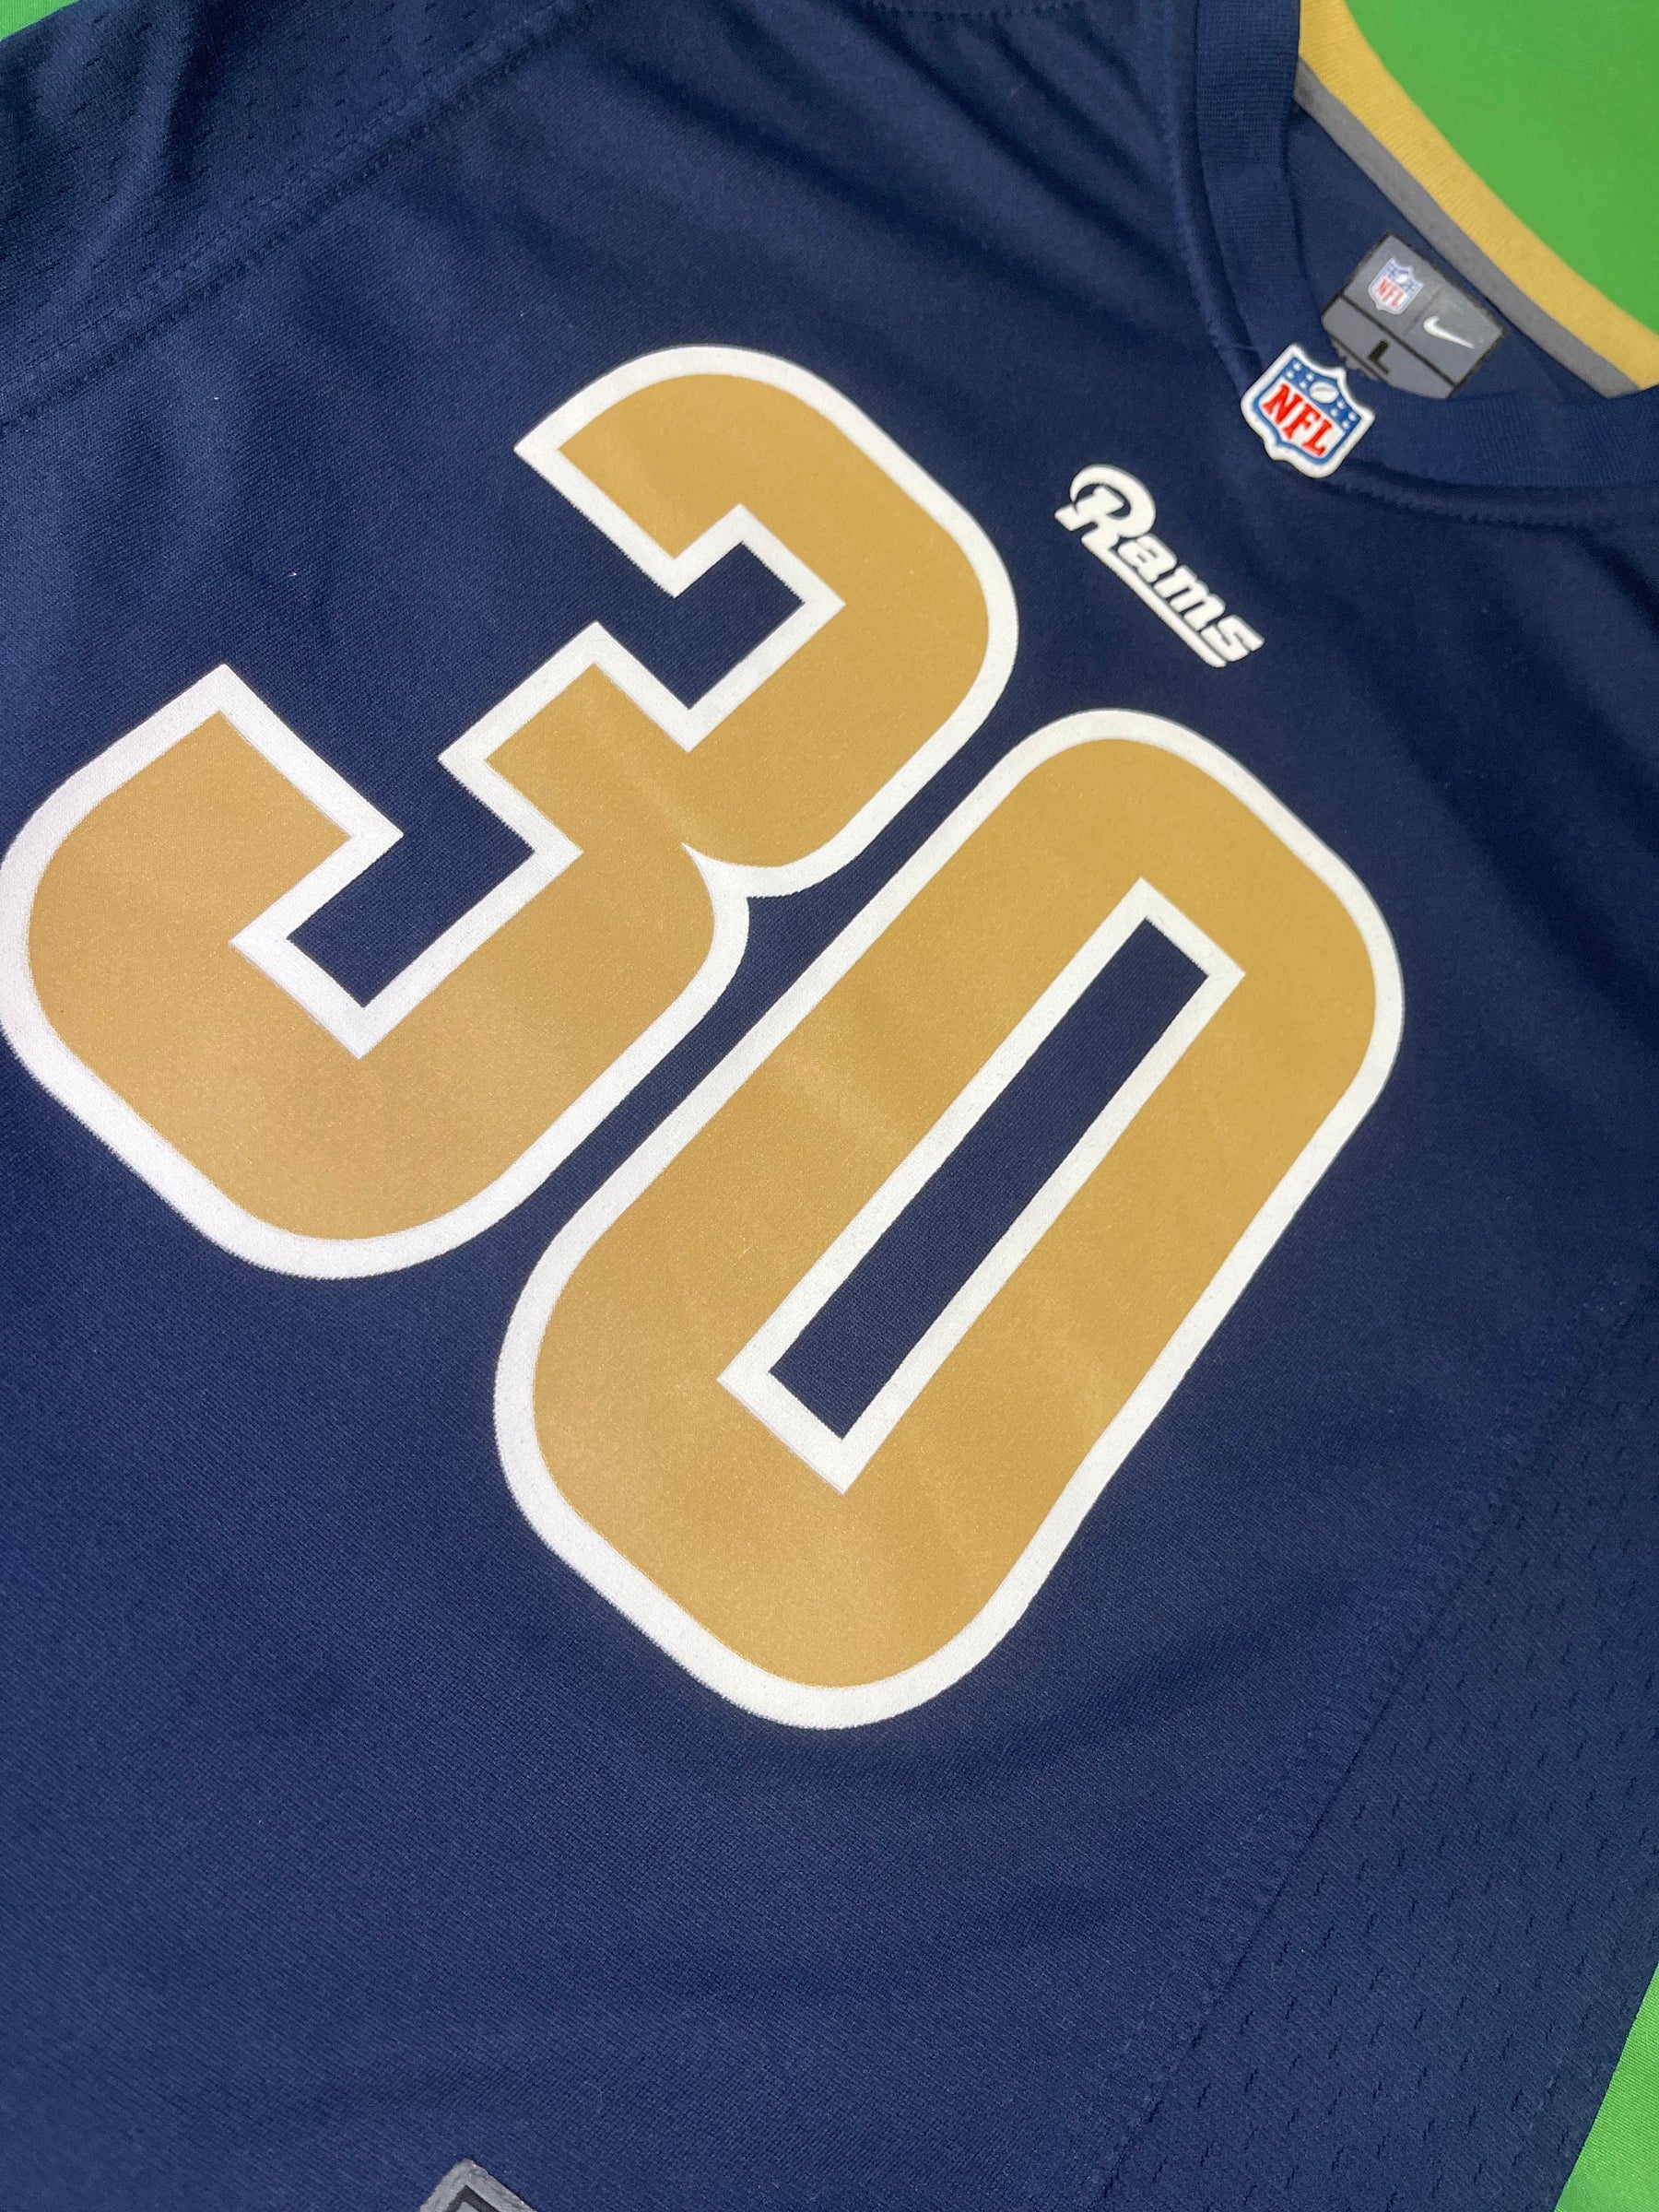 NFL Los Angeles Rams Gurley II #30 Game Jersey Youth Small 7